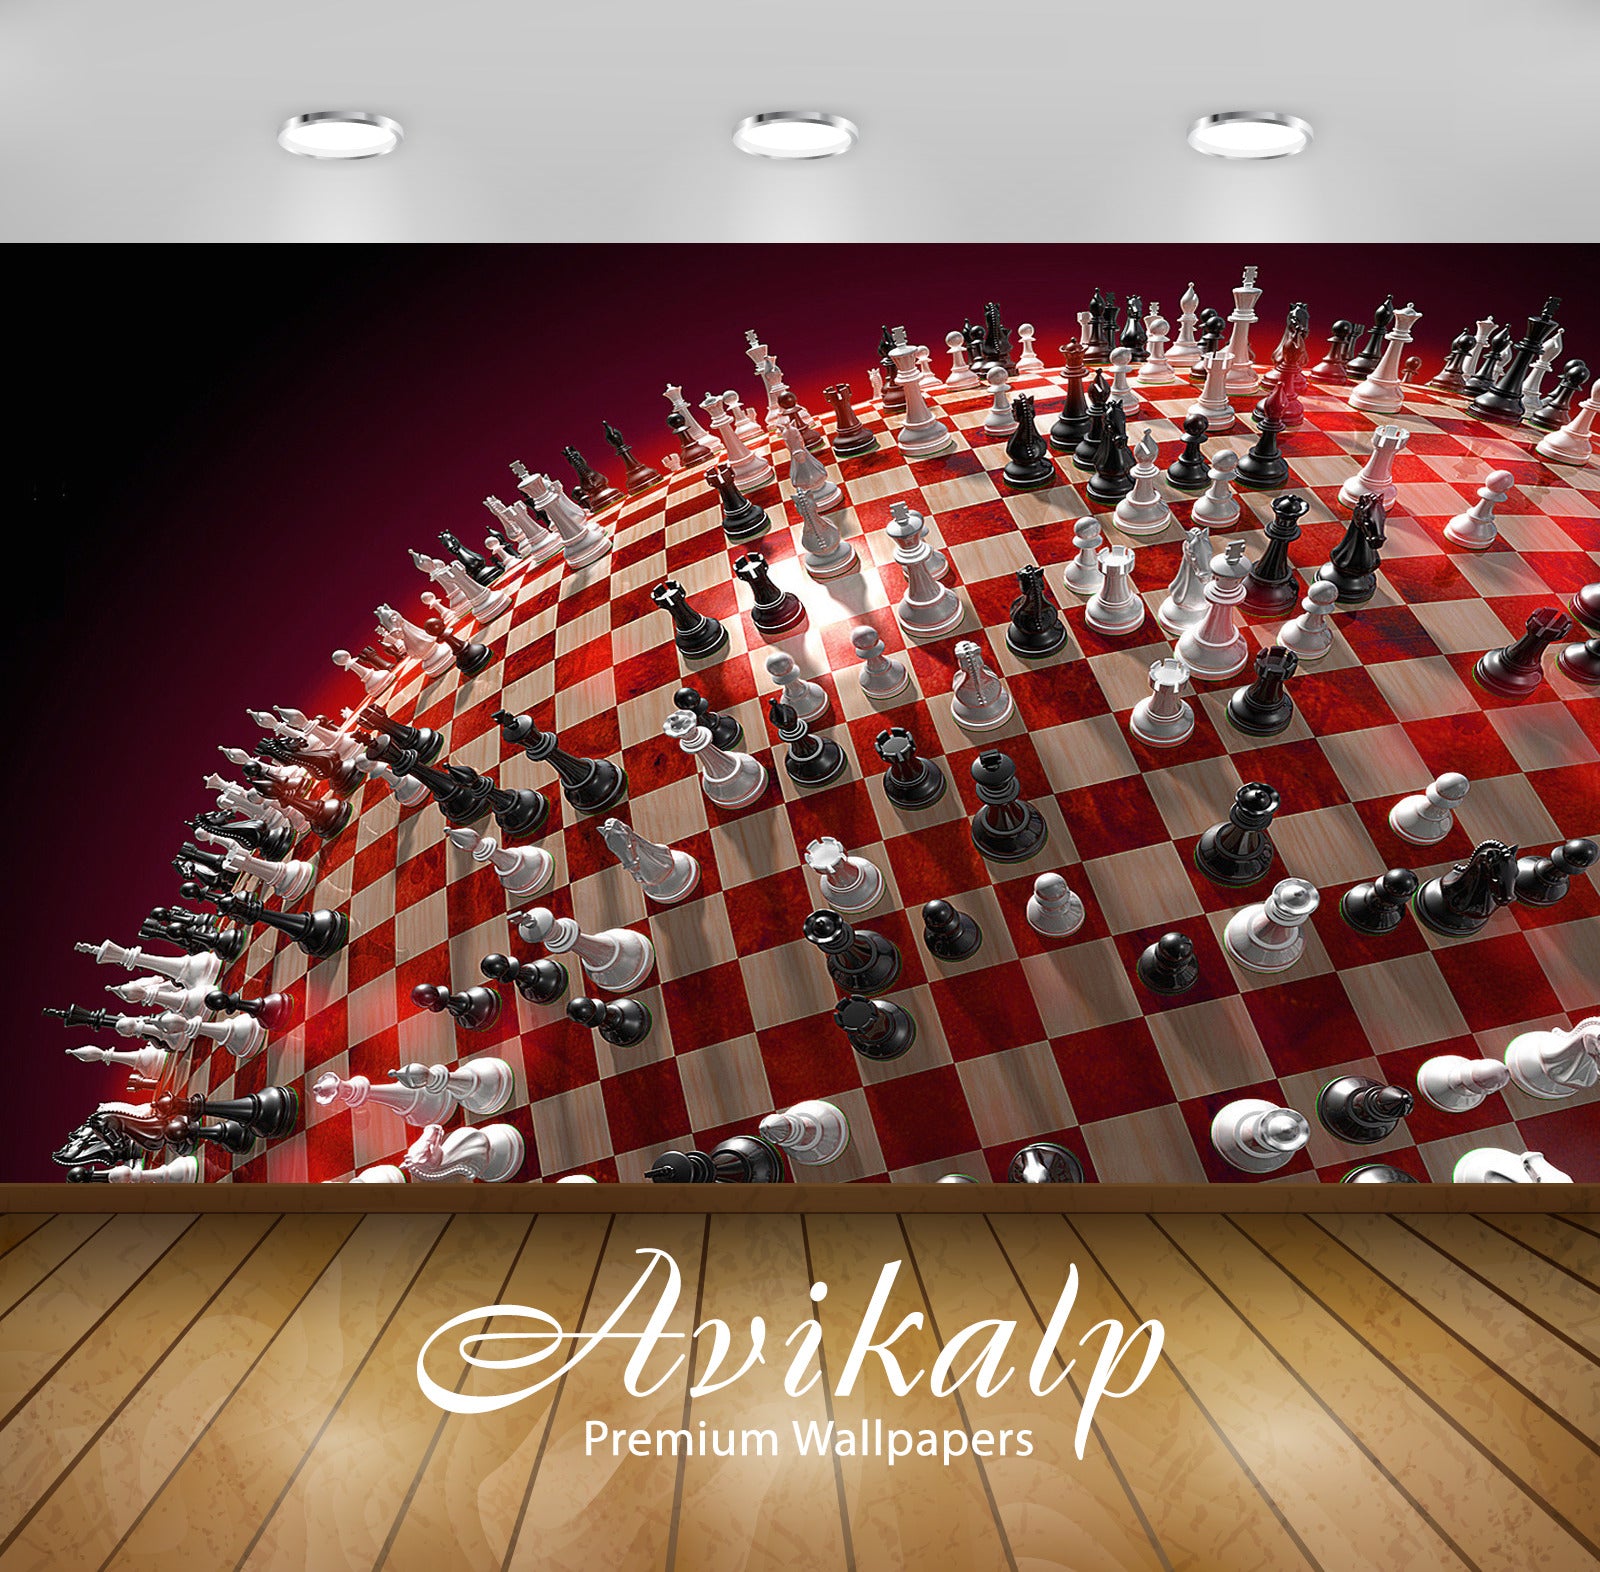 Avikalp Exclusive Awi1903 Chess Board Abstract Full HD Wallpapers for Living room, Hall, Kids Room,